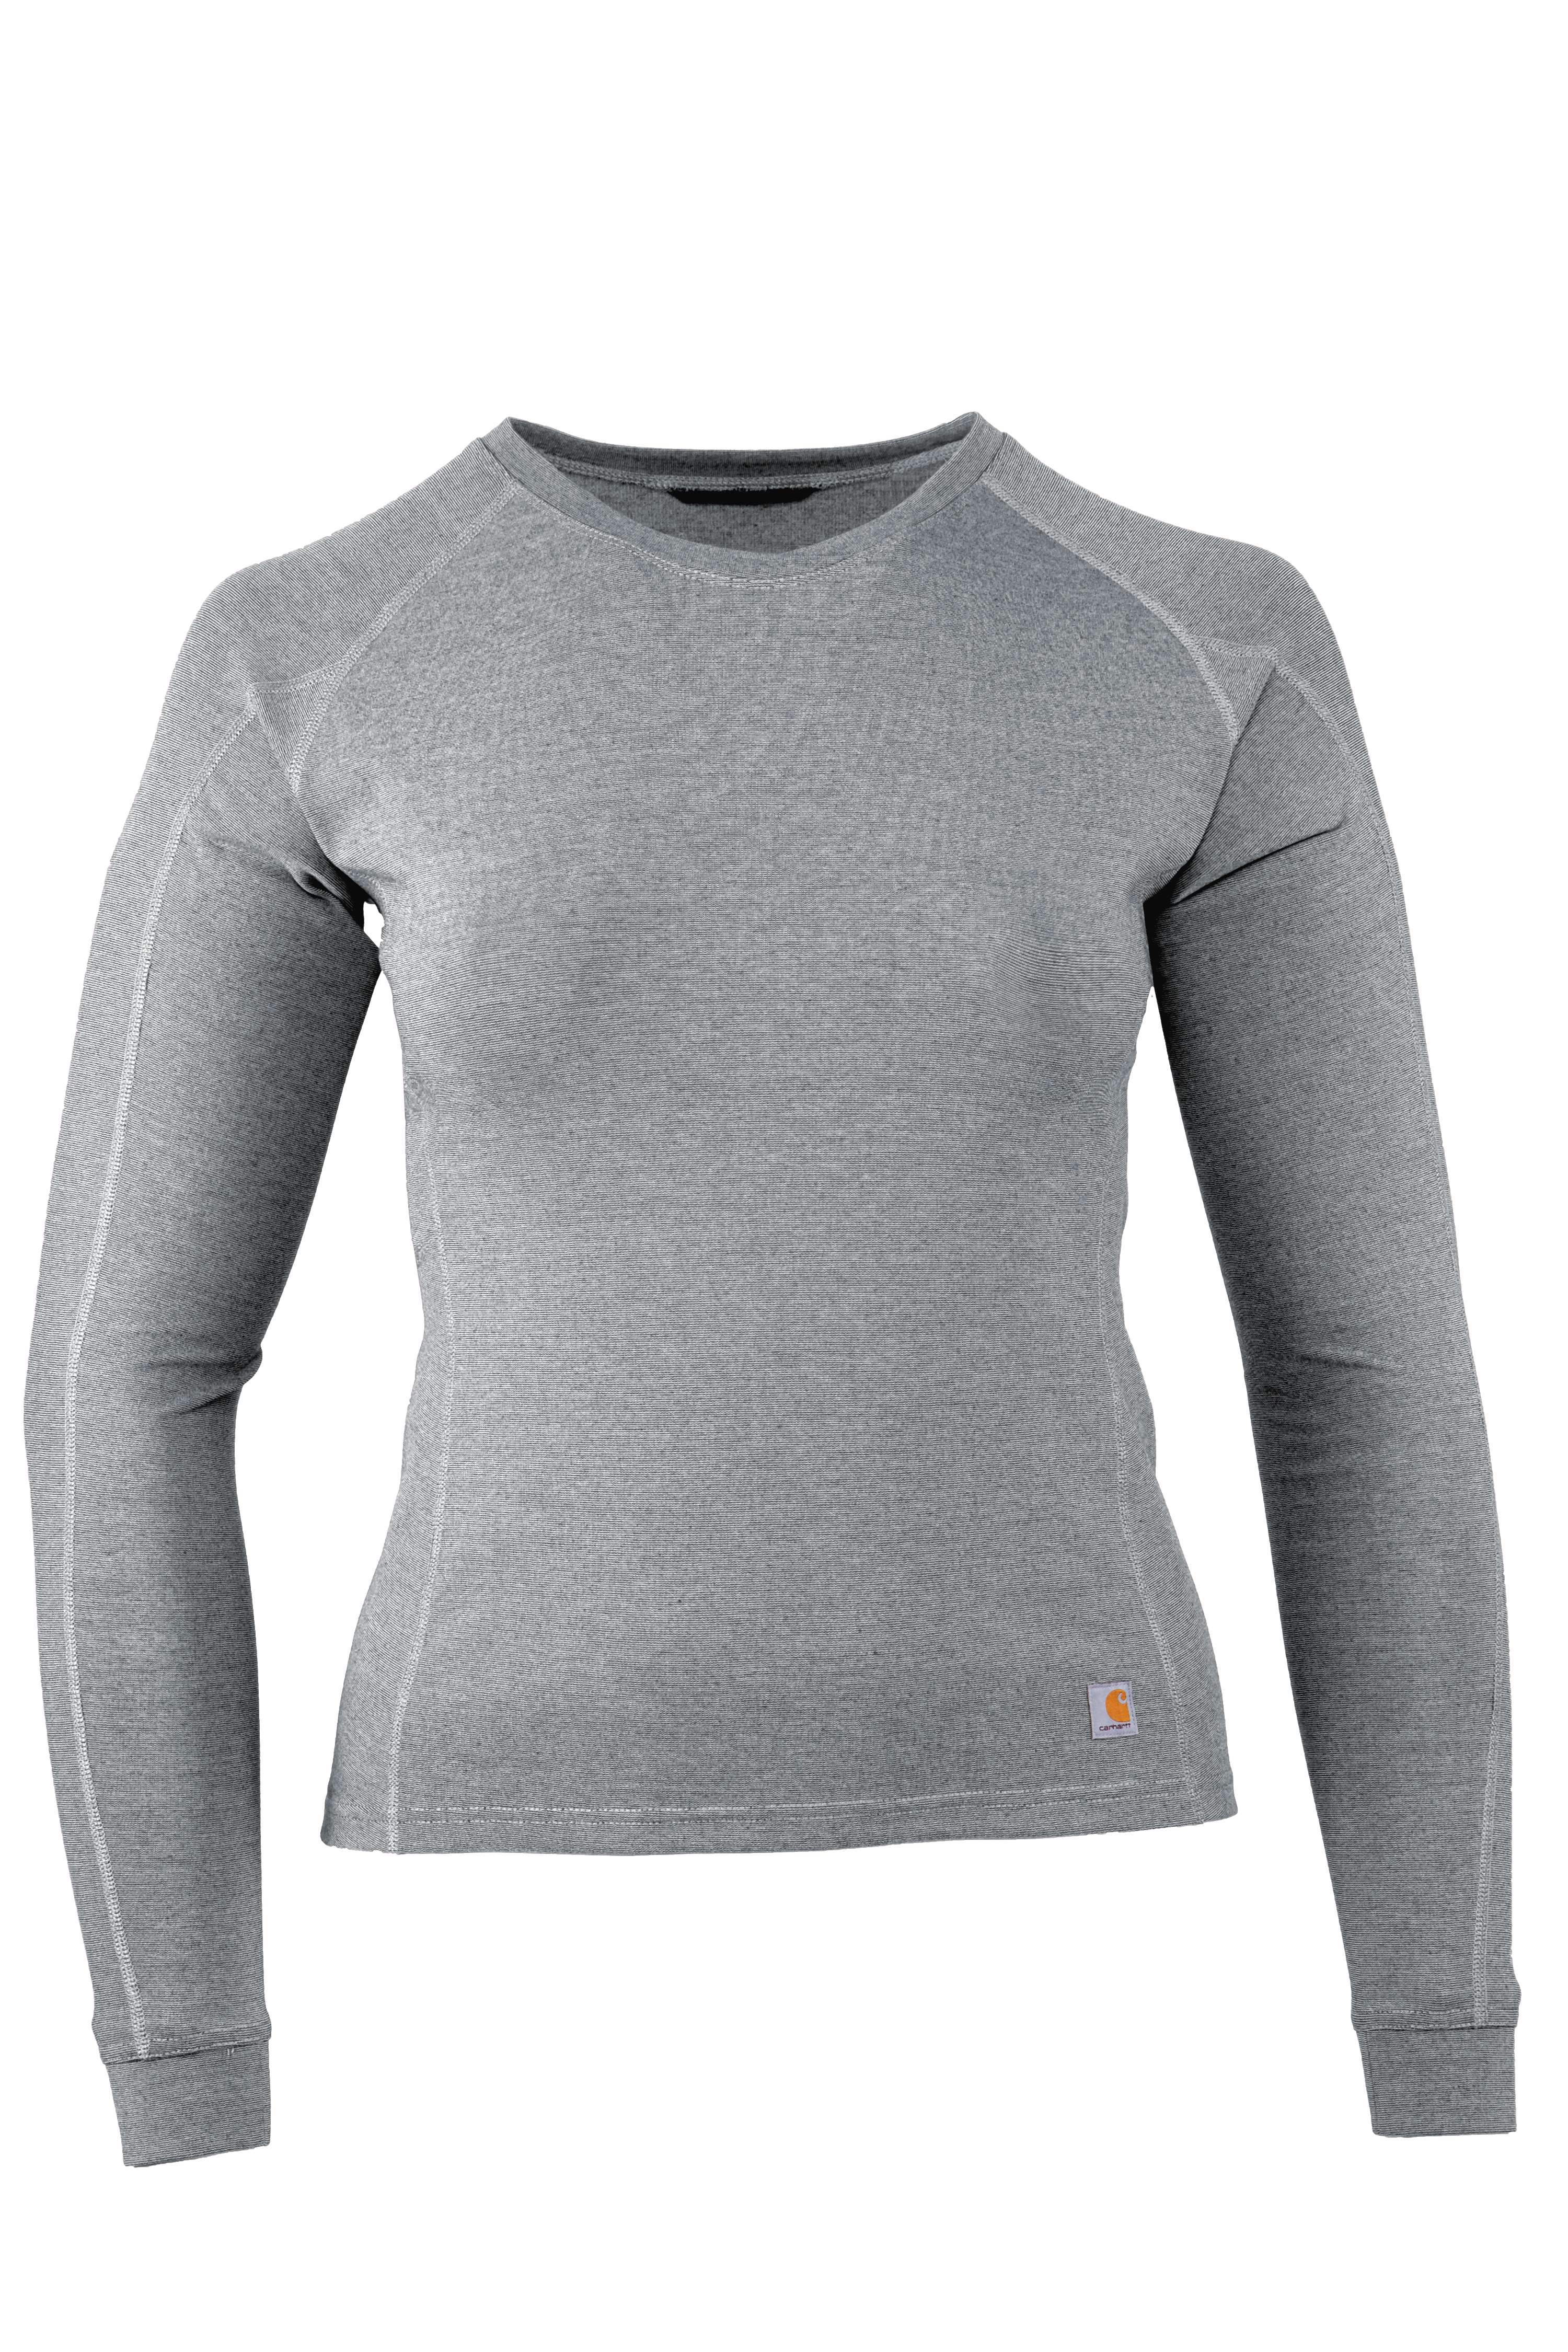 Carhartt Women's Force Midweight Synthetic-Wool Blend Base Layer